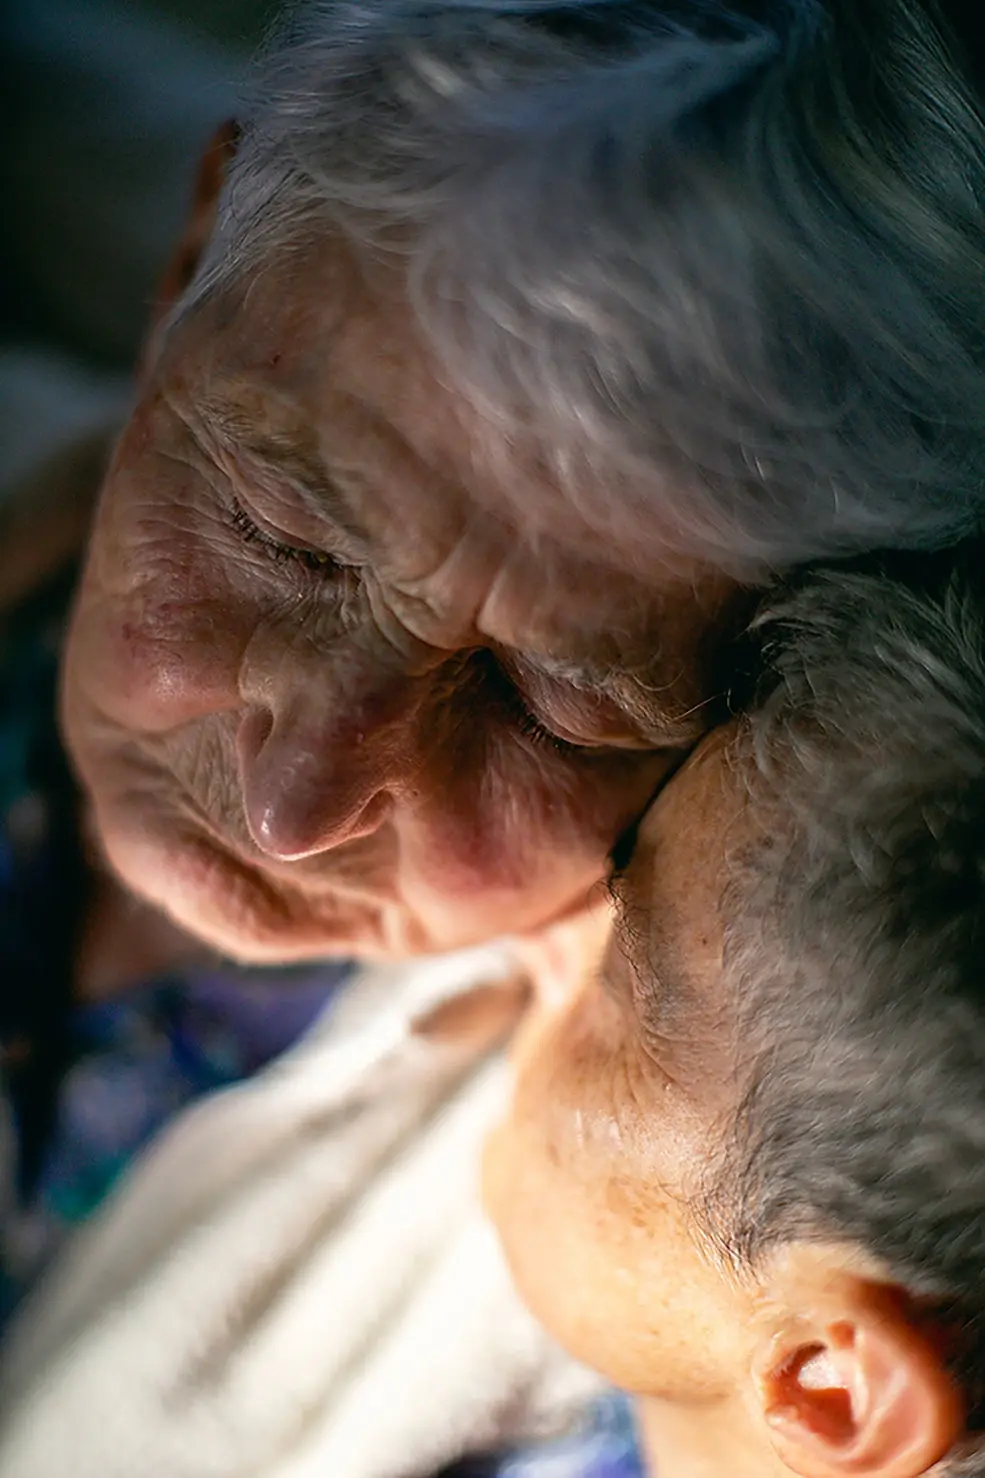 Close-up portrait photograph of two elderly women embracing each other warmly, expressing love and companionship.